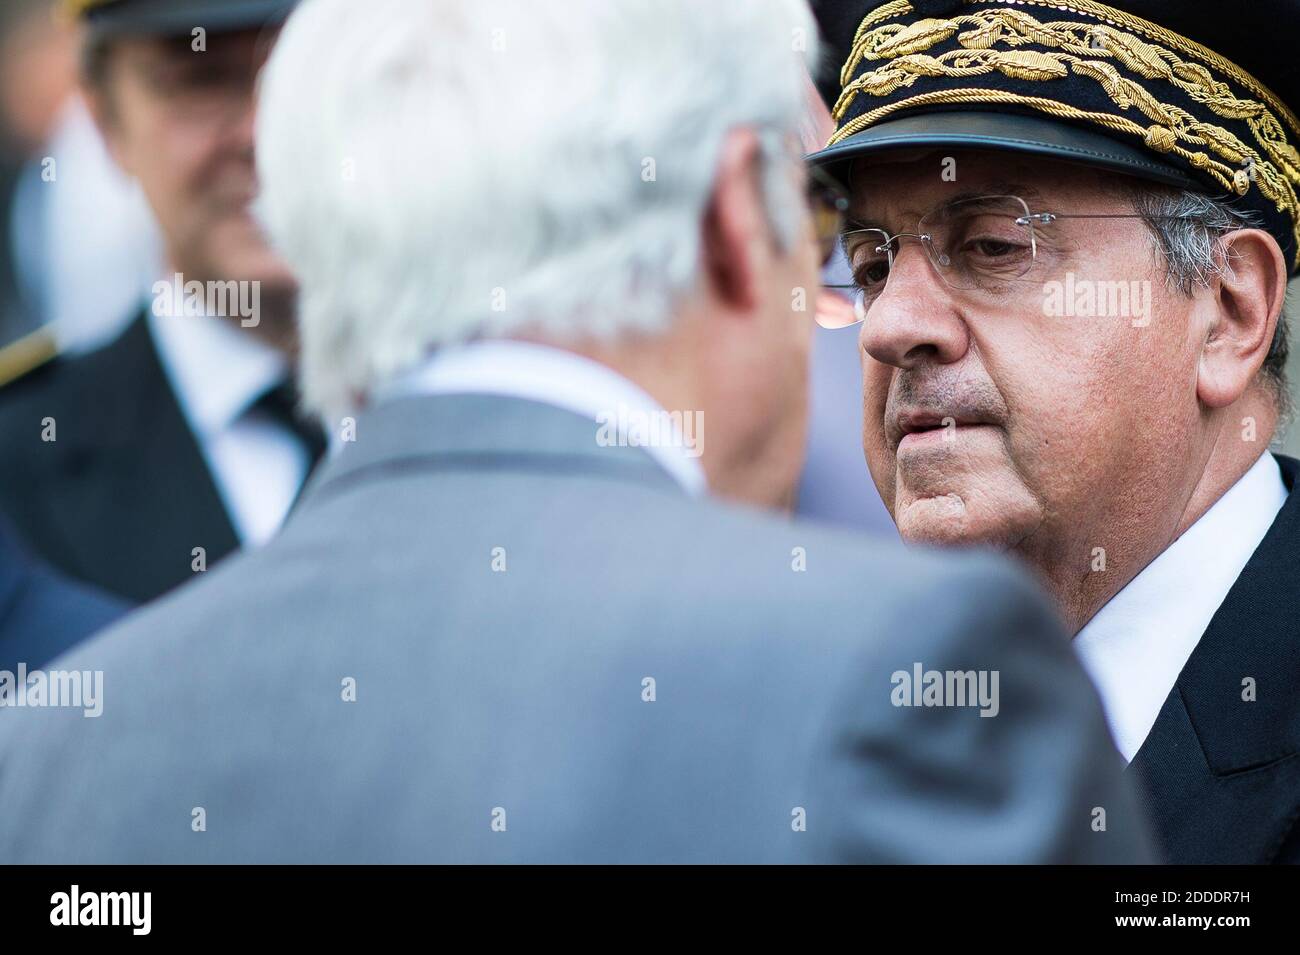 Paris police prefect Michel Delpuech during a ceremony commemorating the 76th anniversary of the Vel d'Hiv roundup in Paris on July 22, 2018. The Vel' d'Hiv Roundup (Rafle du Vélodrome d'Hiver) was a Nazi-directed raid and mass arrest of some 13,000 Jews in Paris by the French police on 16 and 17 July 1942, to be sent to Nazi death camps. Photo by Eliot Blondet/ABACAPRESS.COM Stock Photo